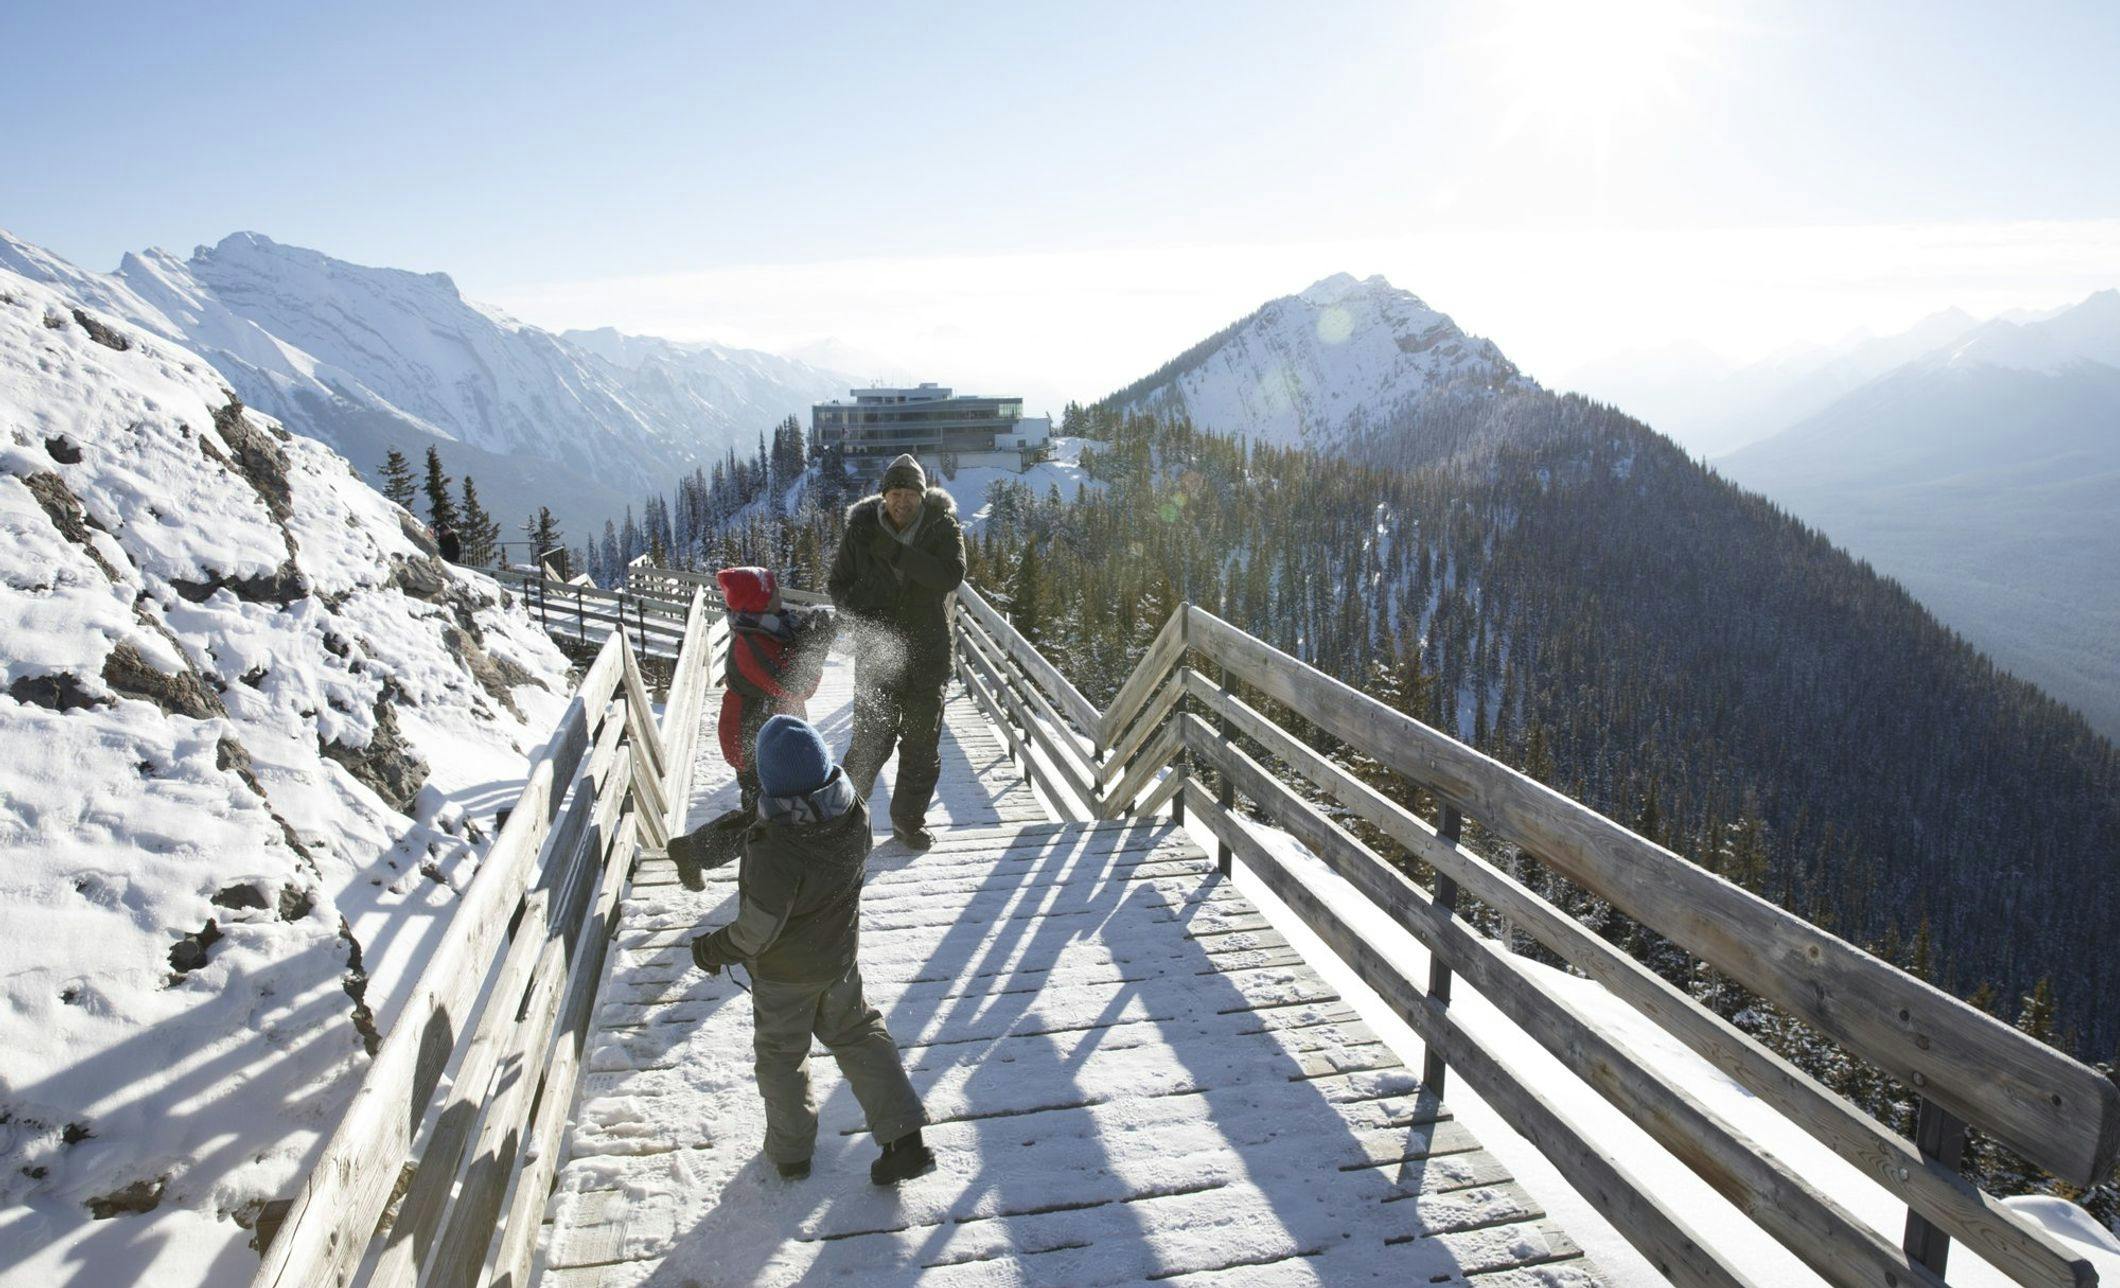 Family playing on the boardwalk at the top of Sulphur Mountain in the winter. Banff Gondola station in the background